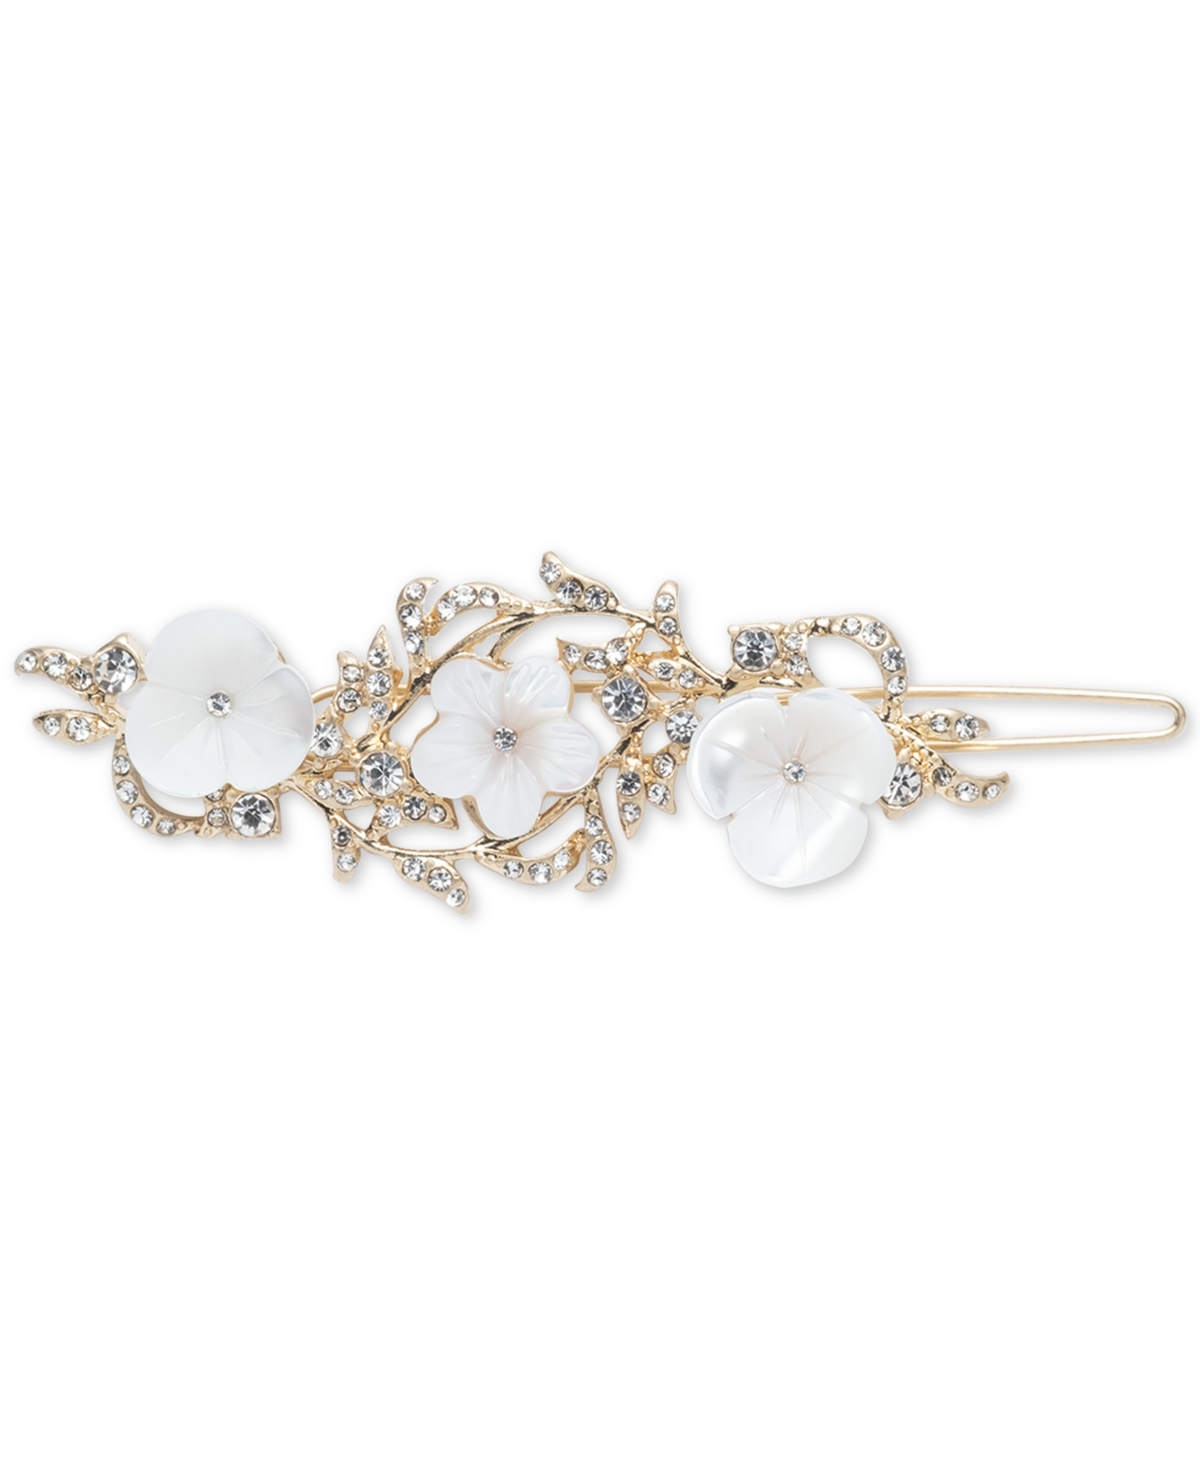 Gold-Tone Pave & Mother-of-Pearl Flower Hair Barrette - White